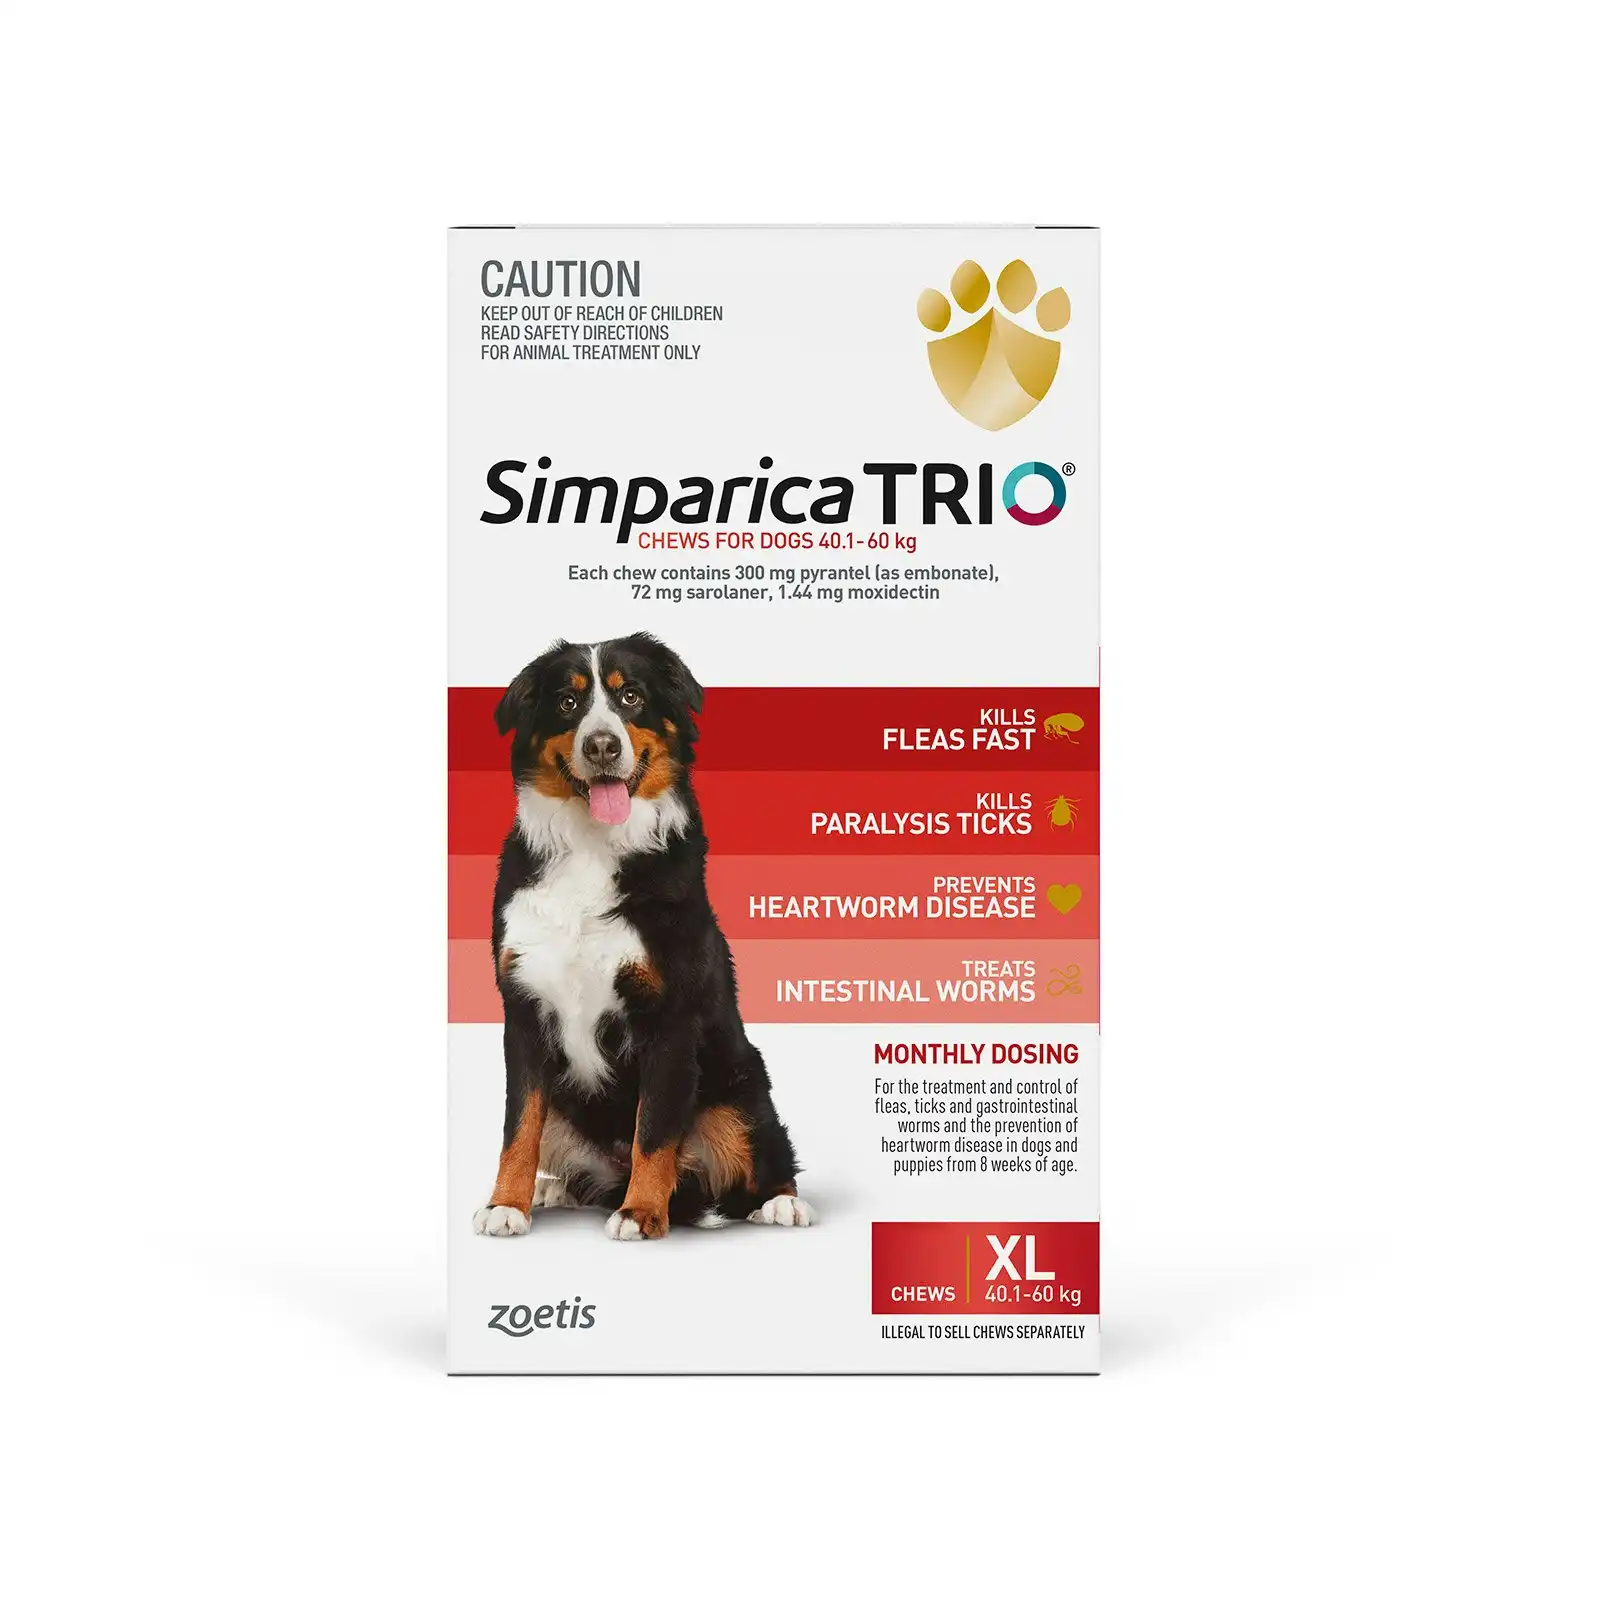 Simparica Trio for Extra Large Dogs 40.1 to 60 Kg (Red) 6 Chews